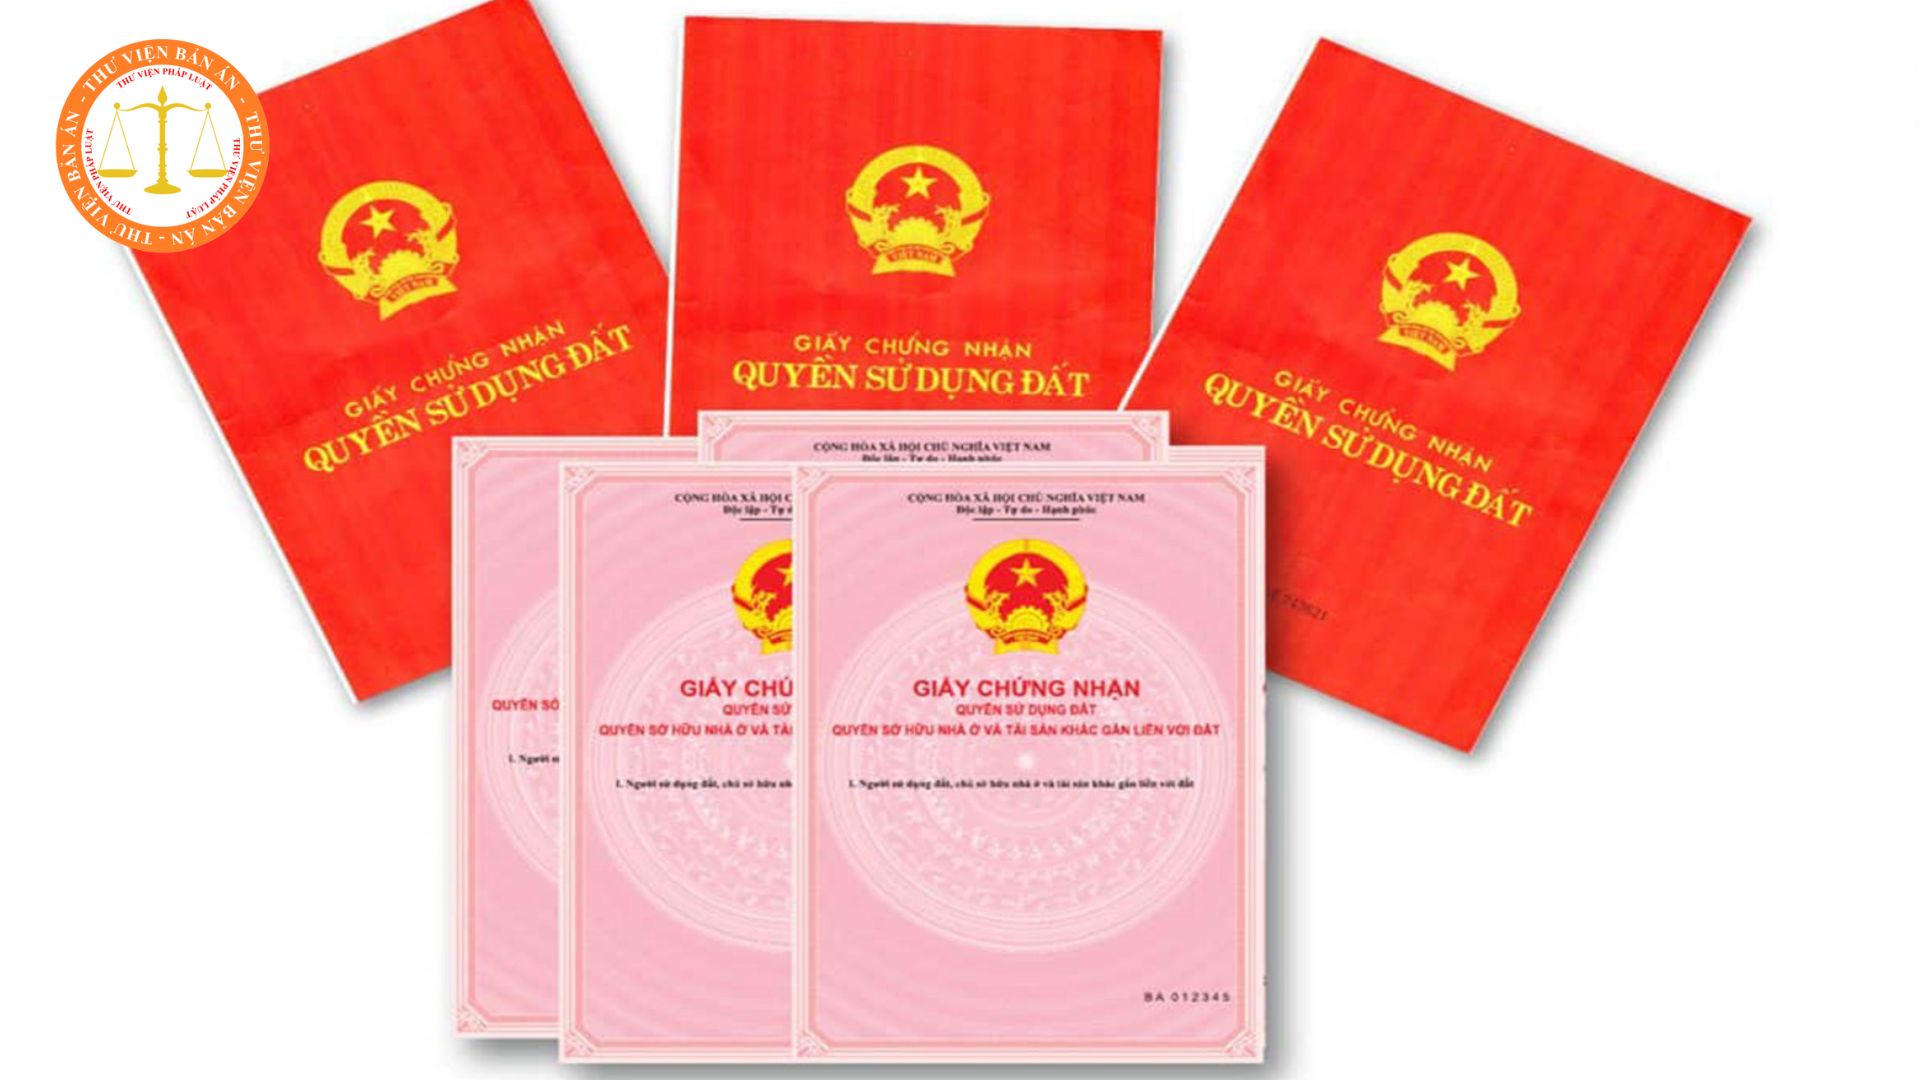 Procedures for re-issuance of land use right certificates in cases of lost or stolen in Vietnam